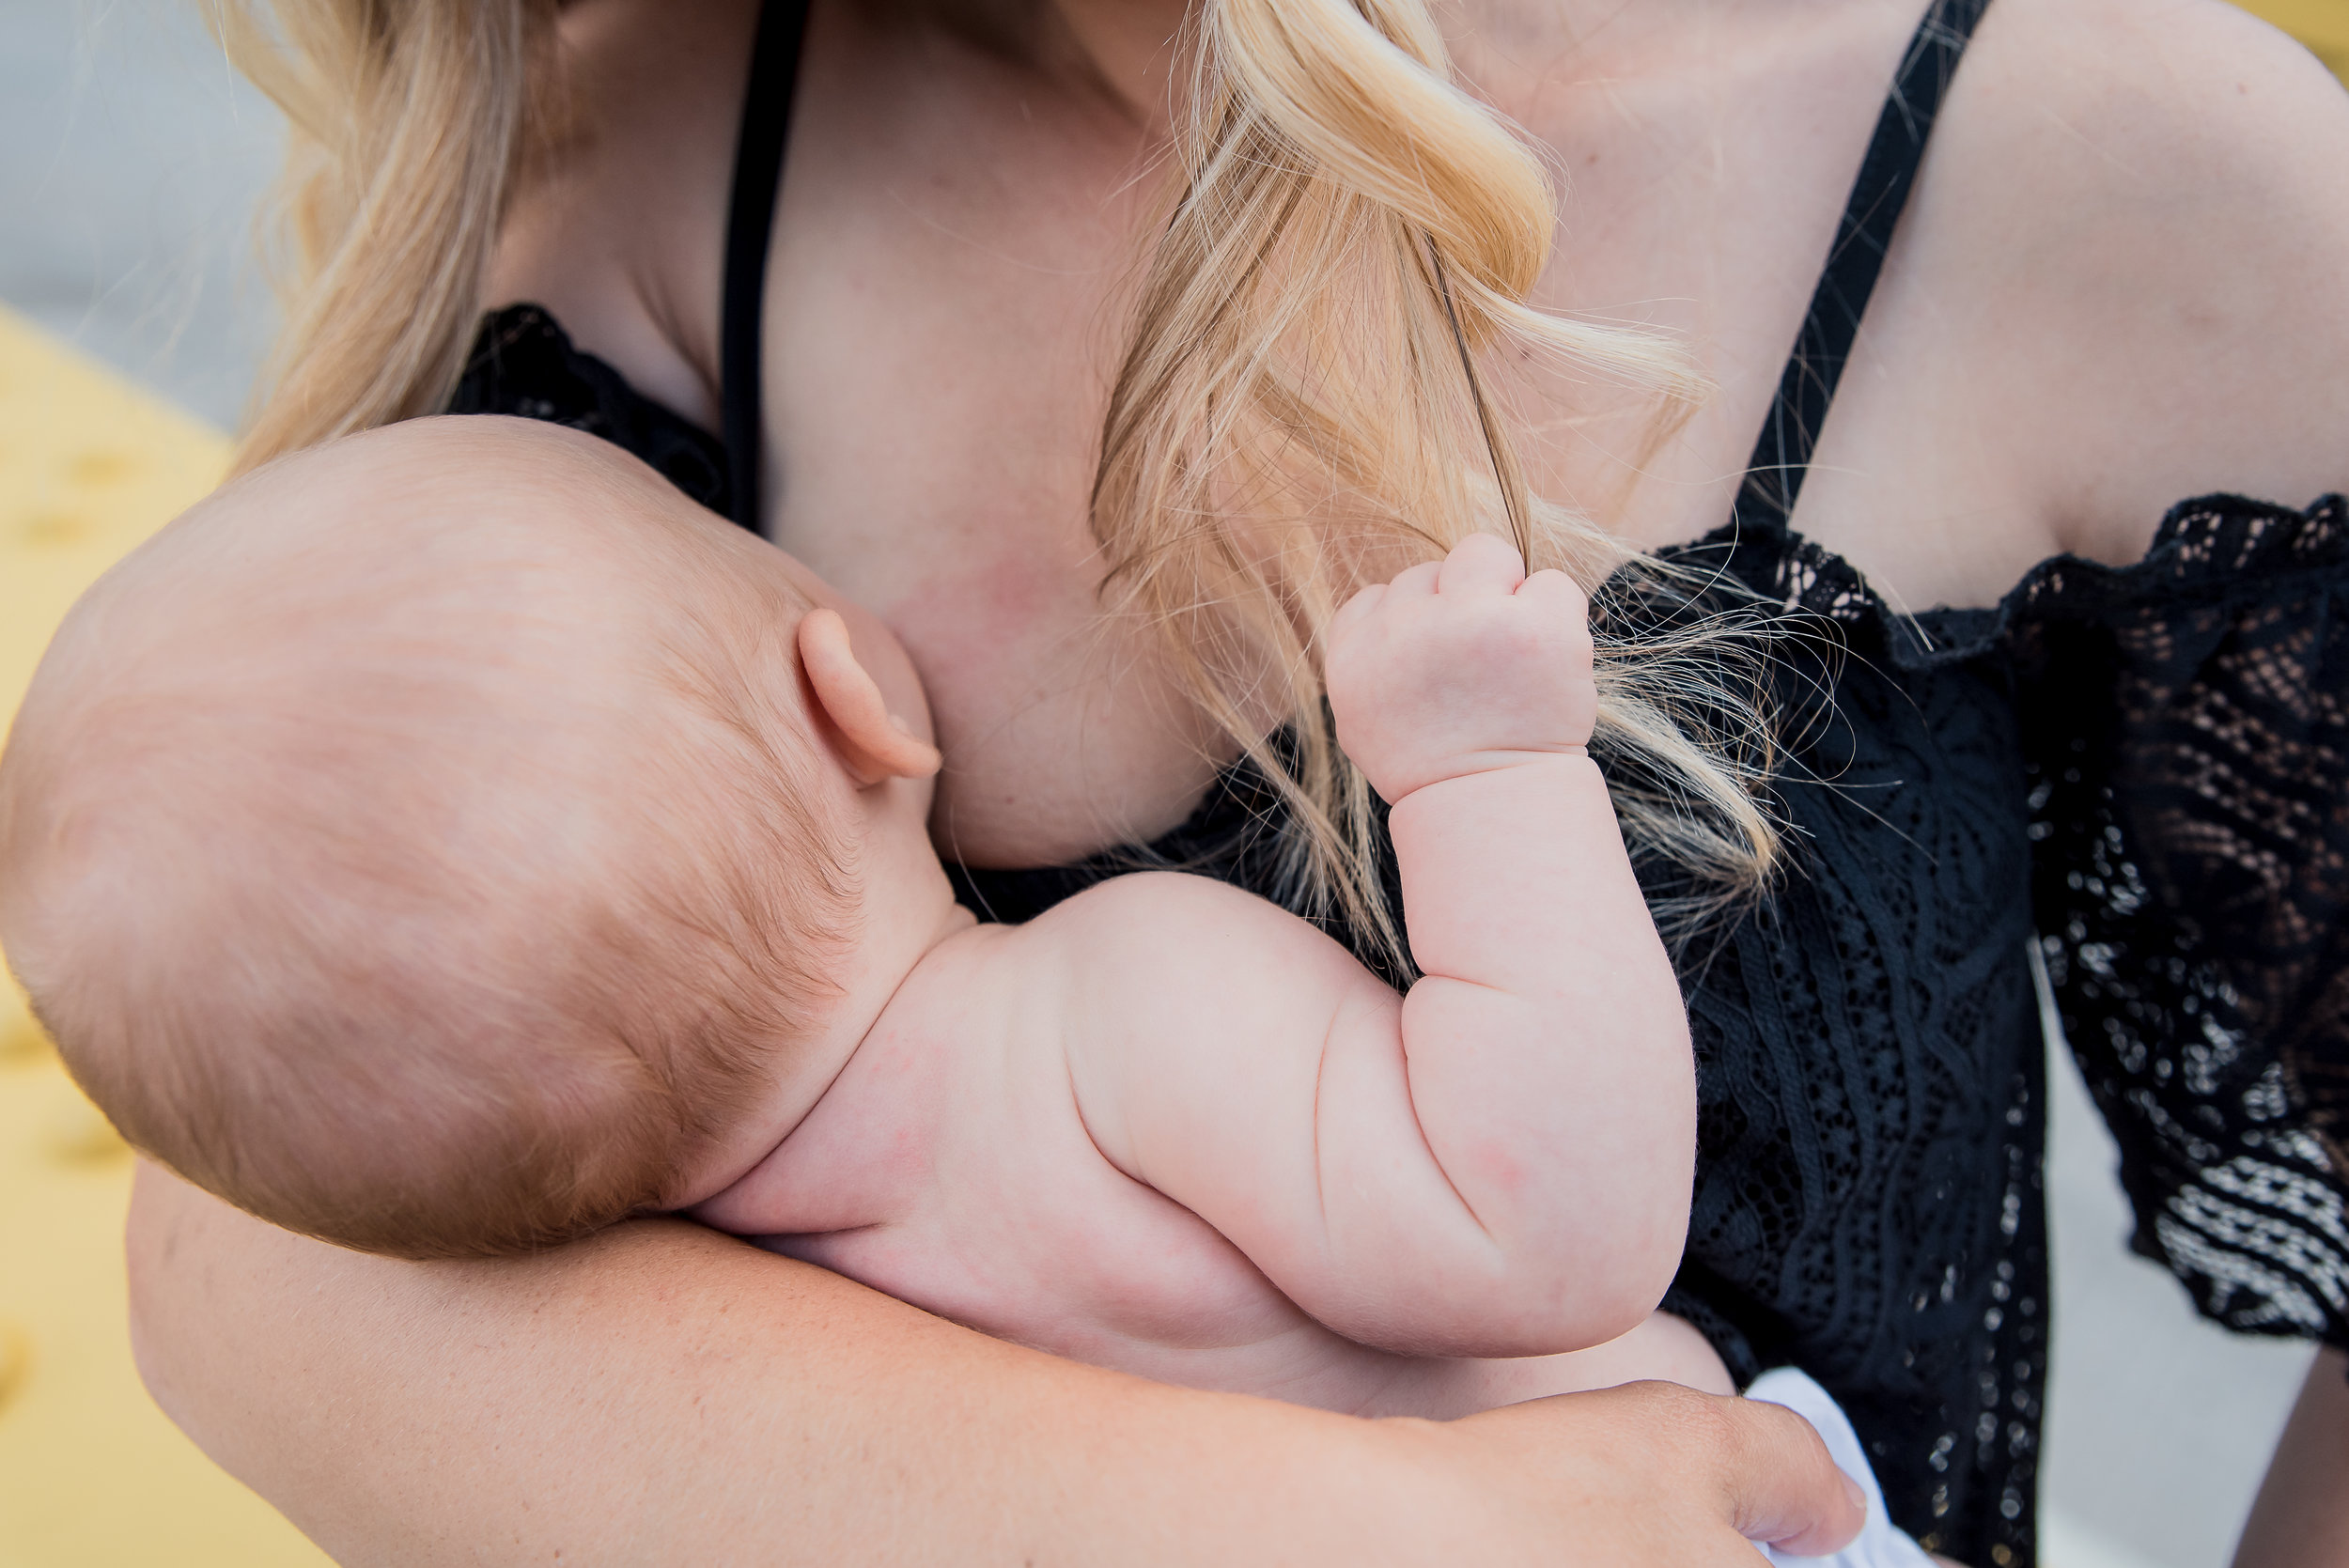 Breastfeed Croydon on X: We celebrate #BBW21 and our community in